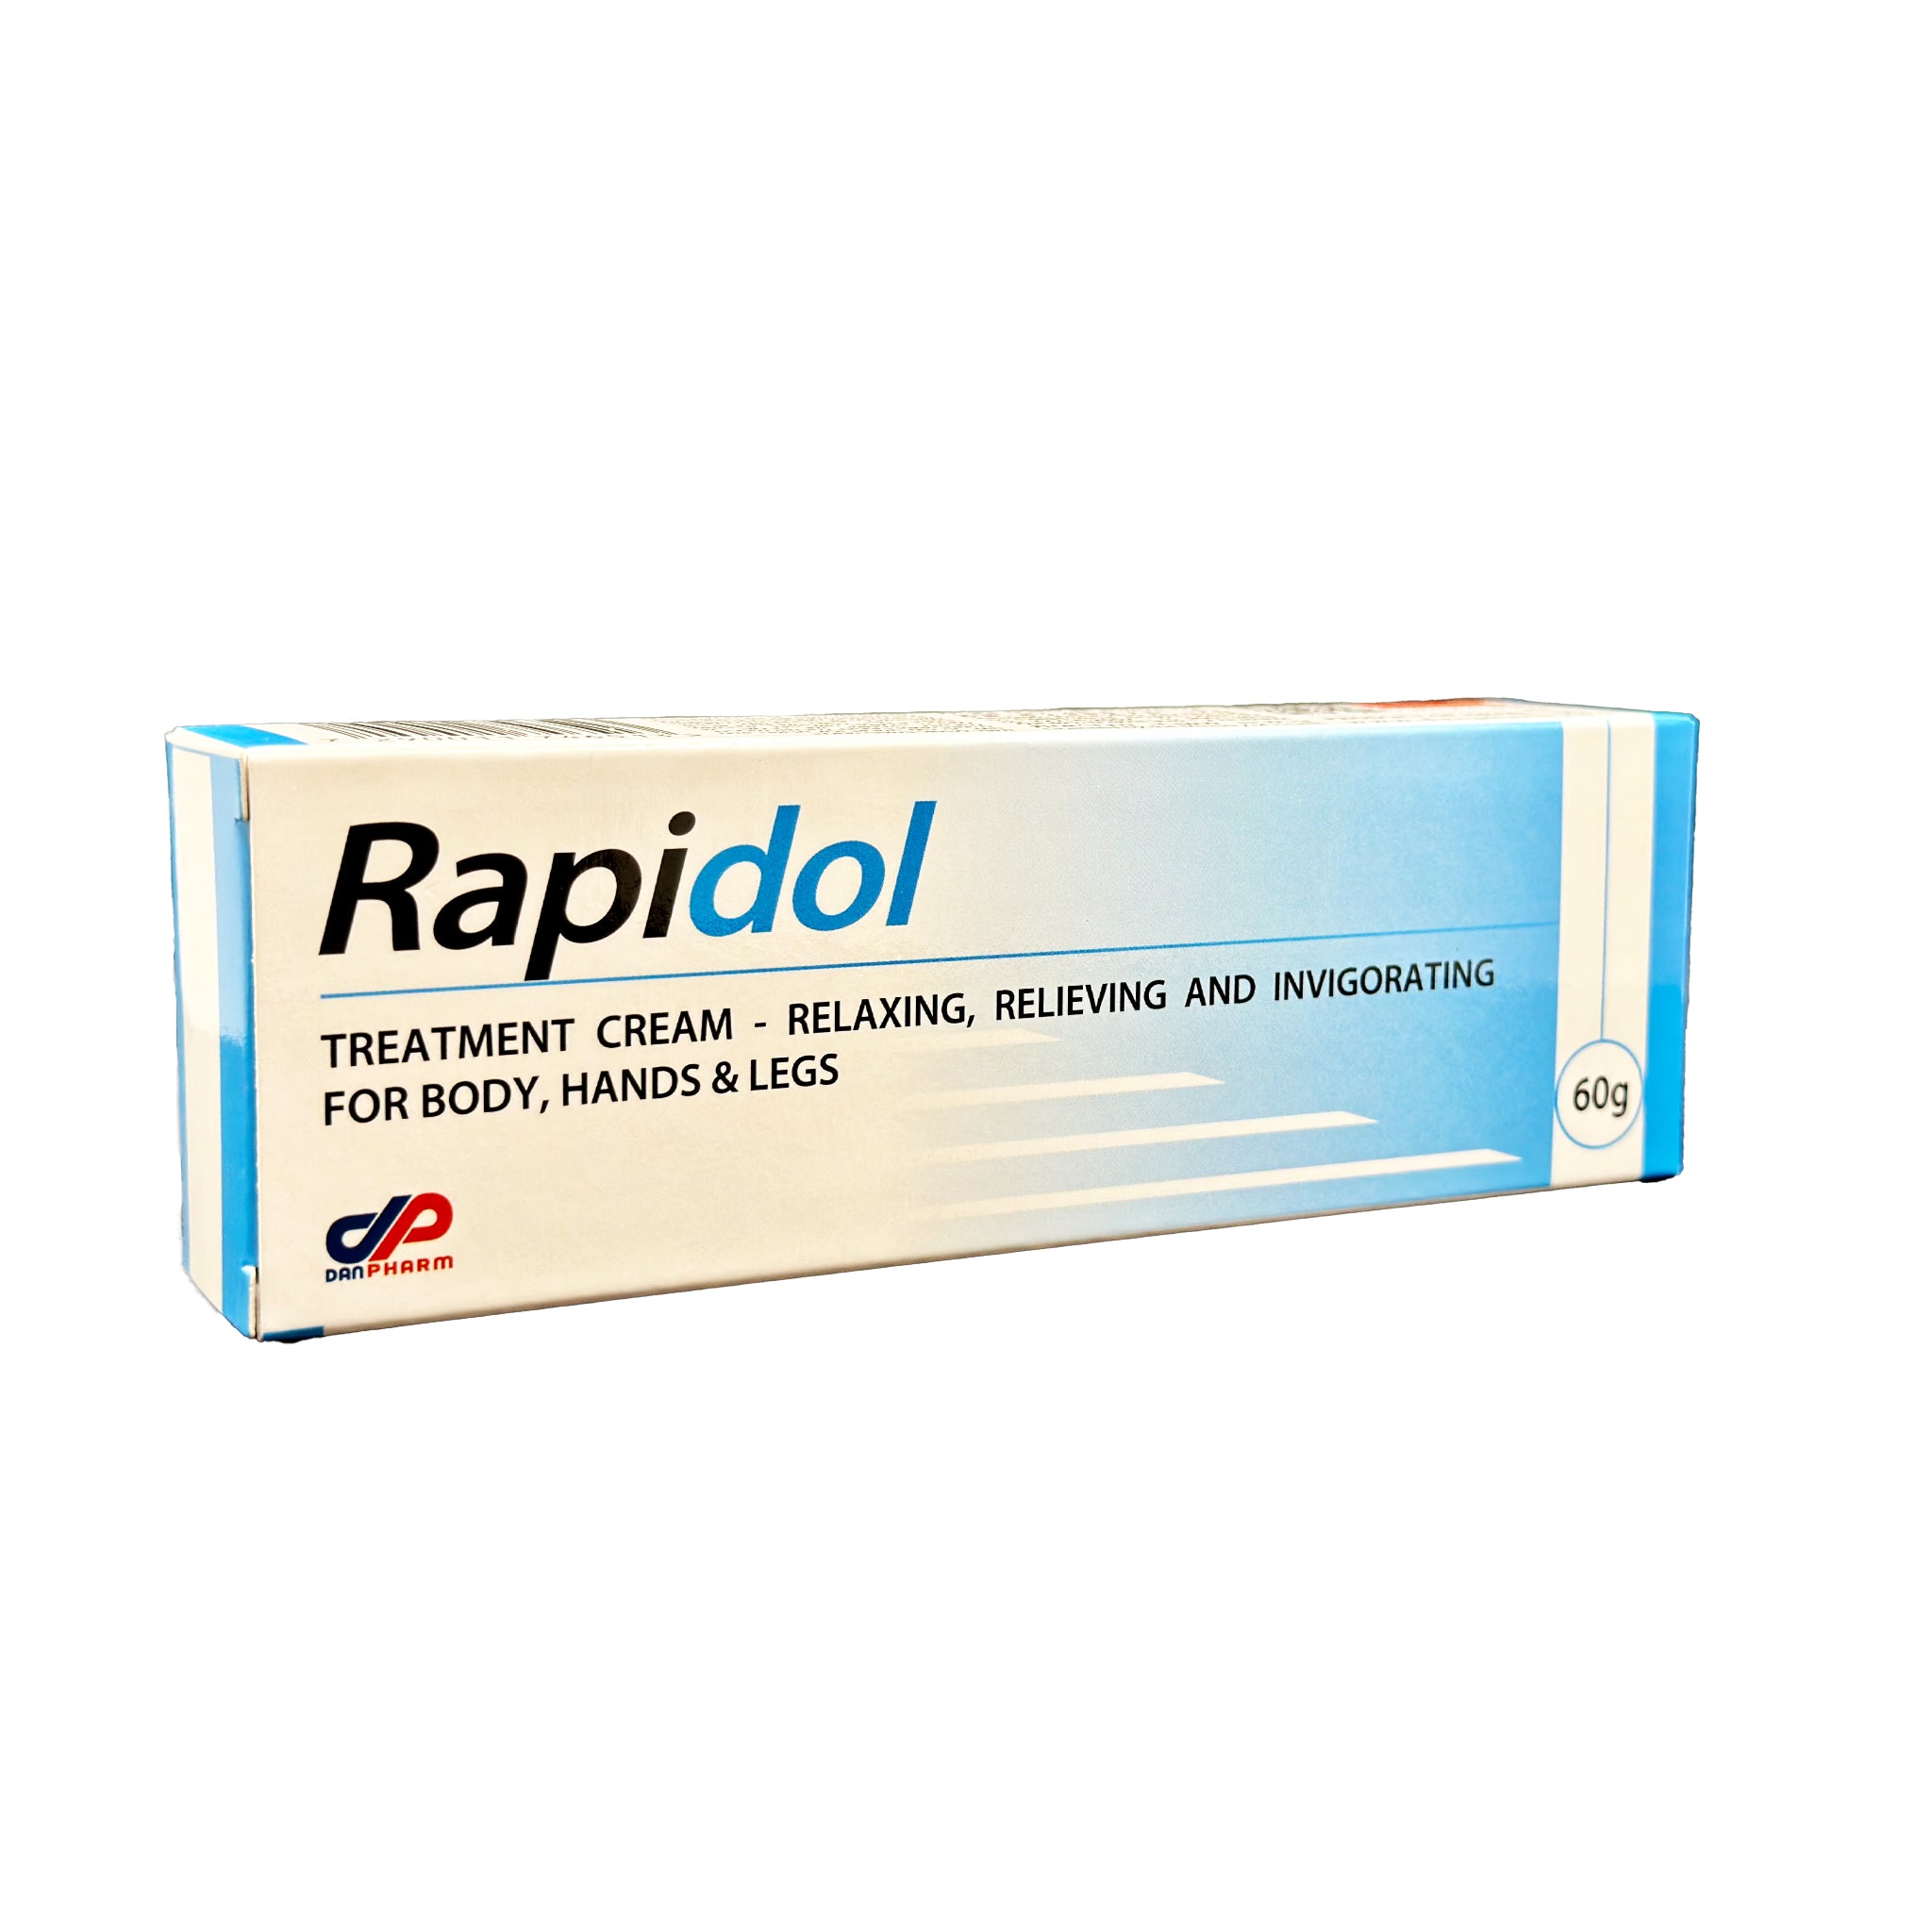 DR. SCHAVIT Rapidol Fast Acting Relaxing Pain Relief cream for Muscles Discomfort and Arthritis